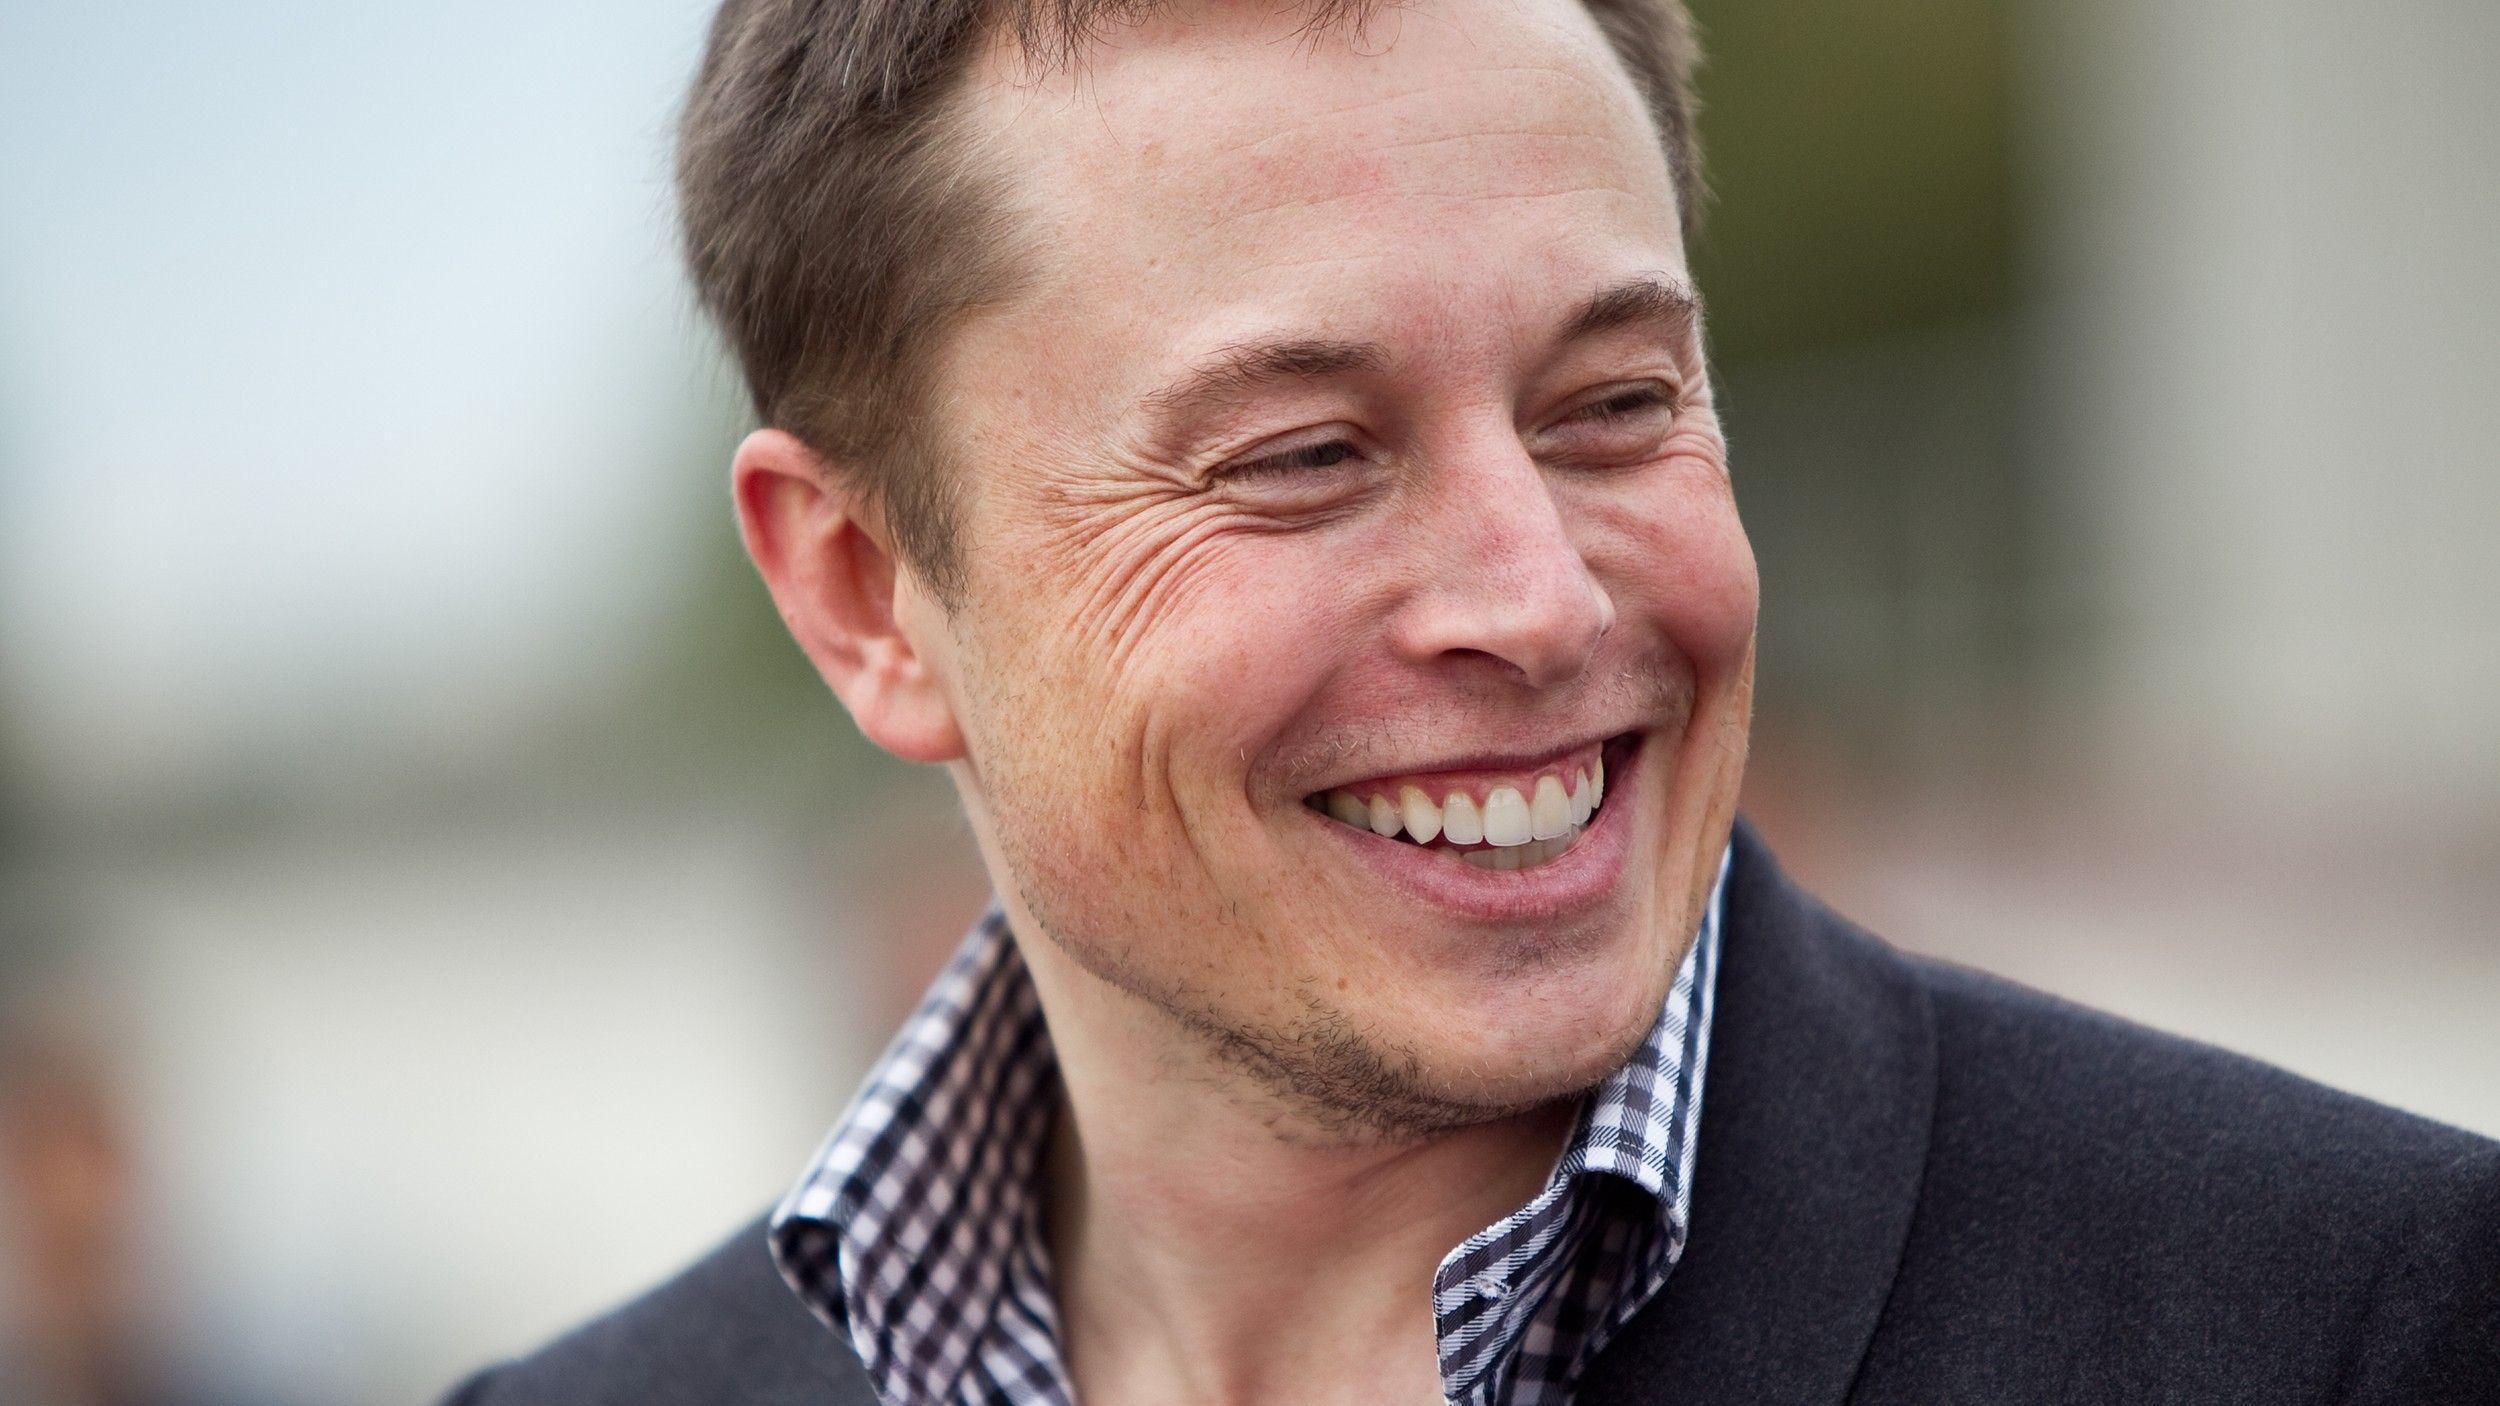 Elon Musk Wallpaper Image Photo Picture Background